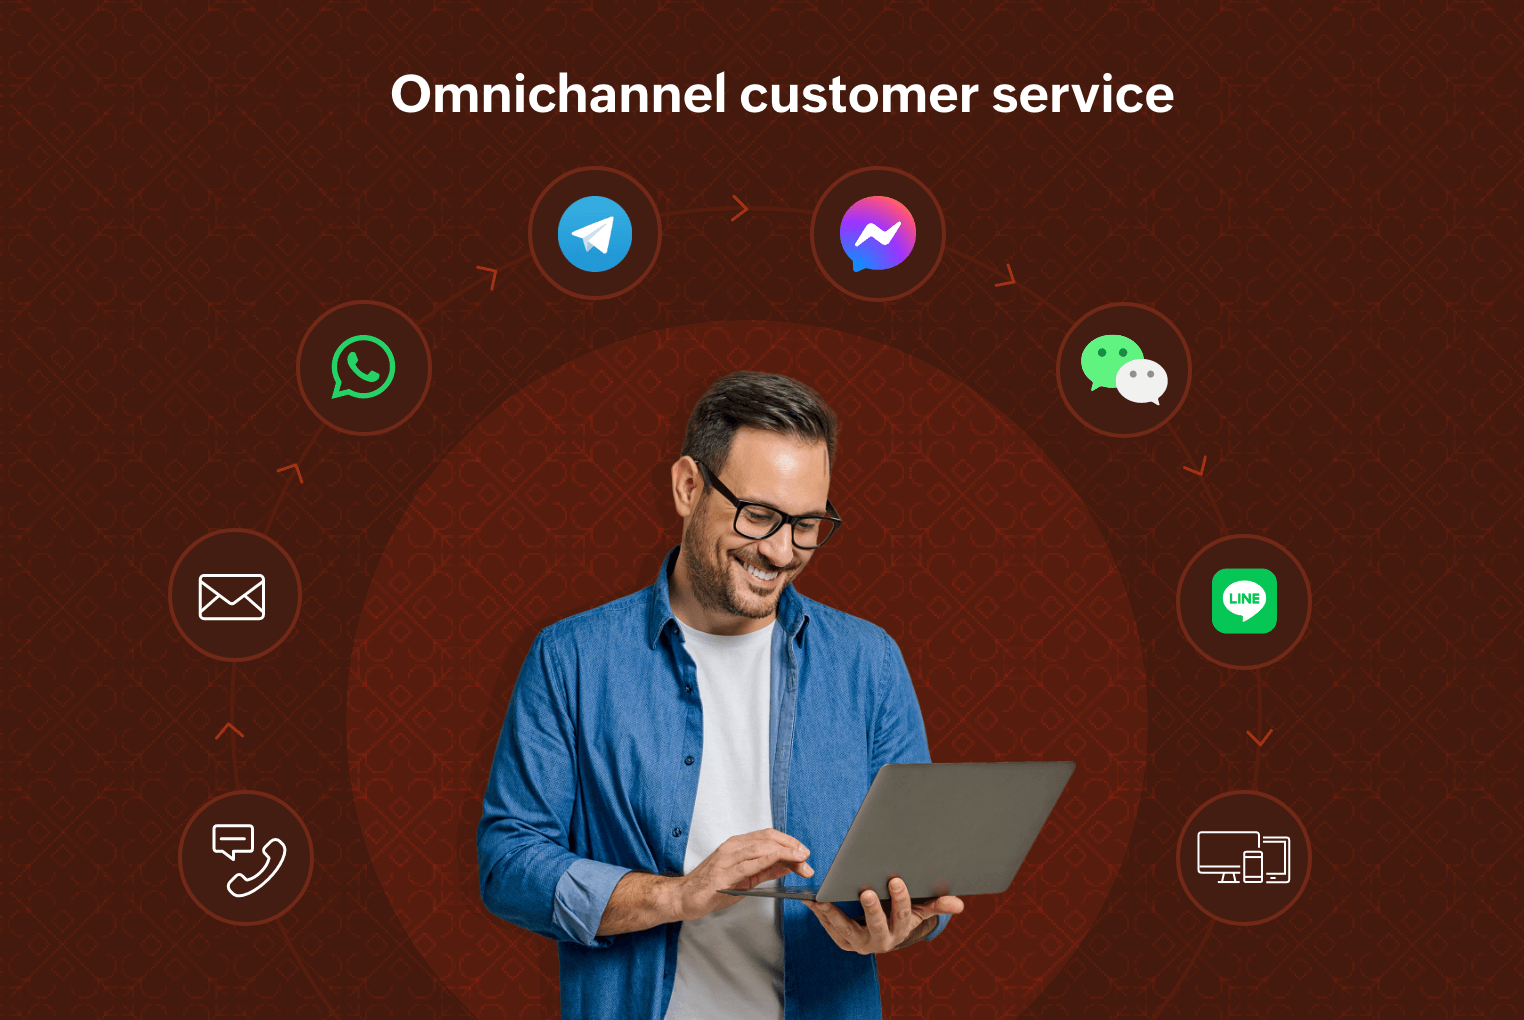 Messaging channels for customer service